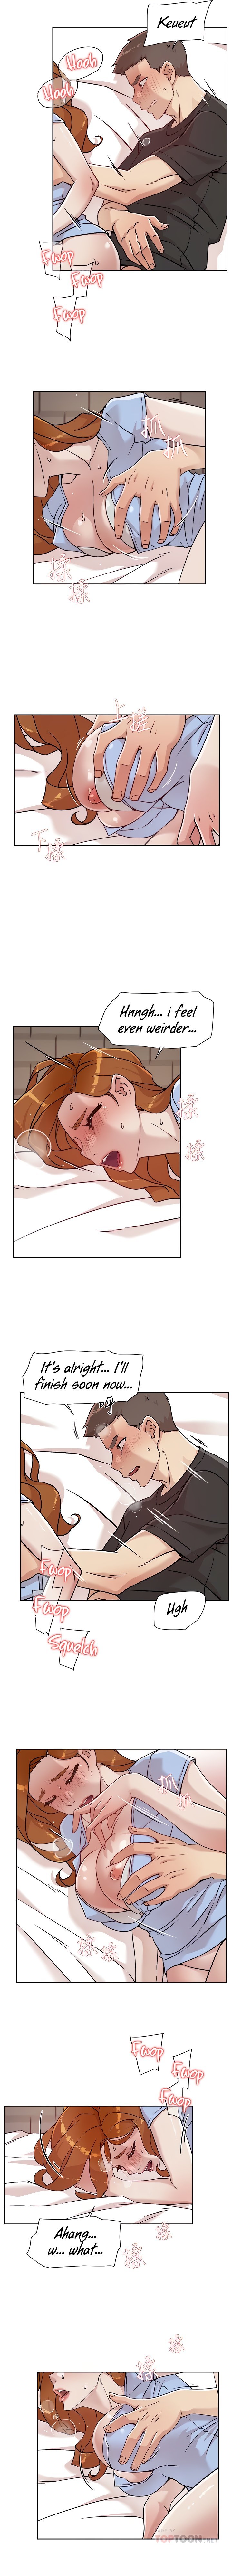 all-about-my-best-friend-chap-33-3